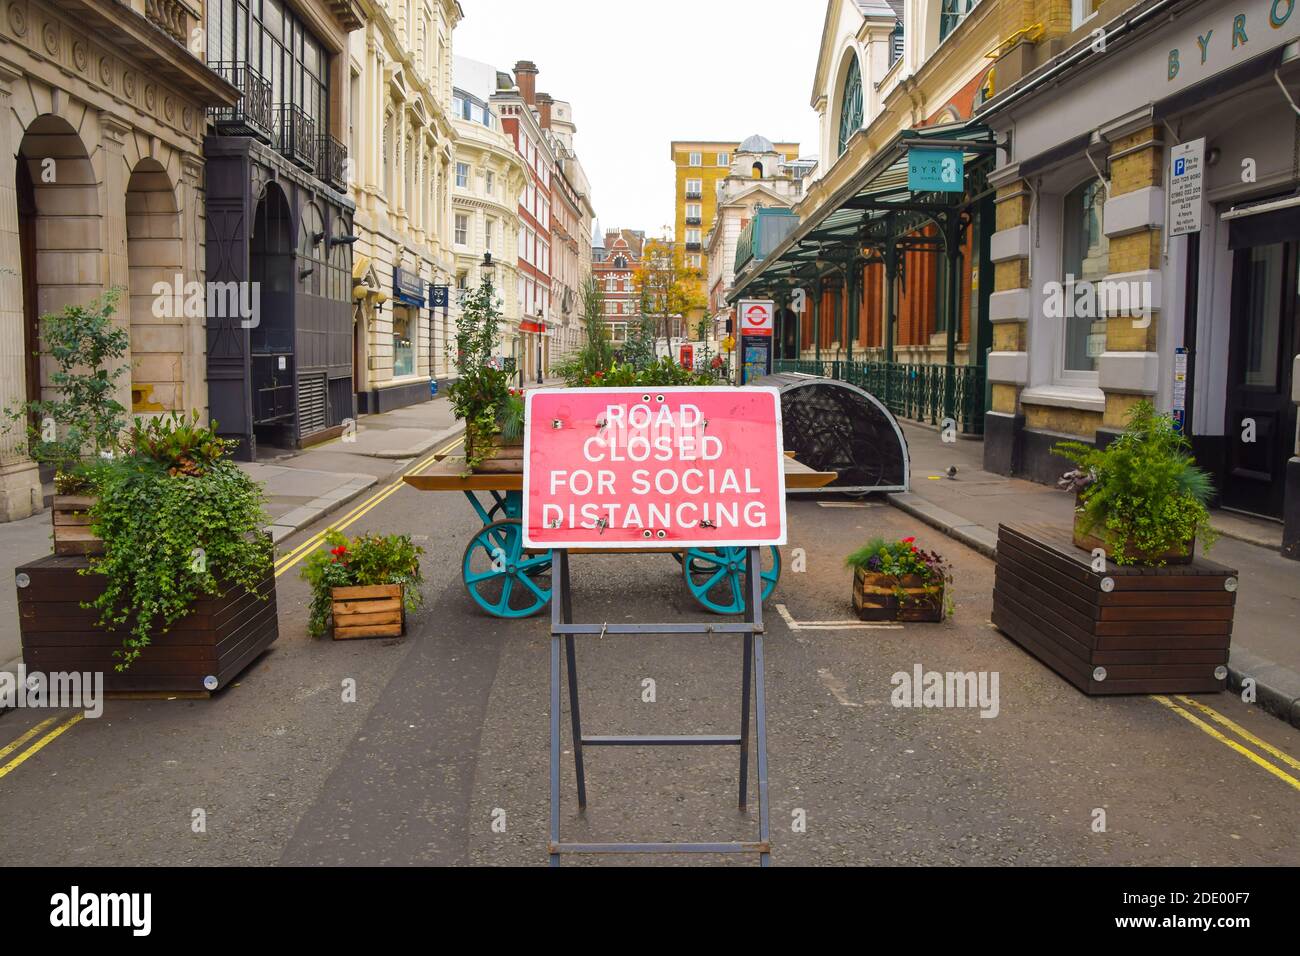 Road Closed For Social Distancing sign in Covent Garden, London. Stock Photo